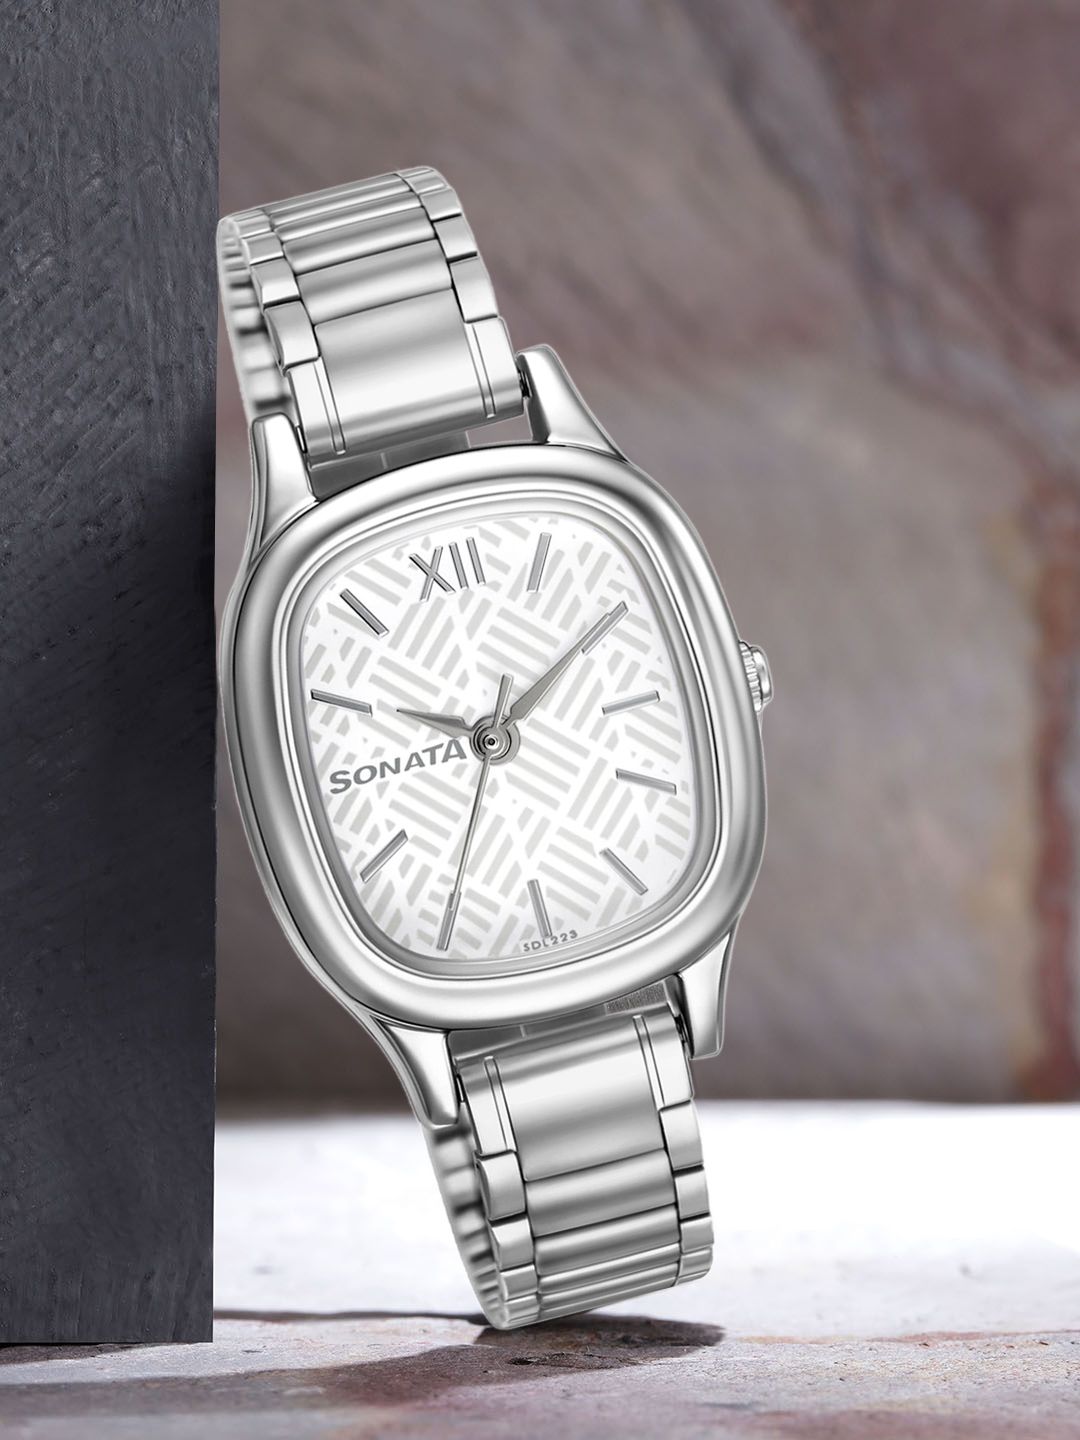 Sonata Women White & Silver-Toned Analogue Watch 8060SM04 Price in India